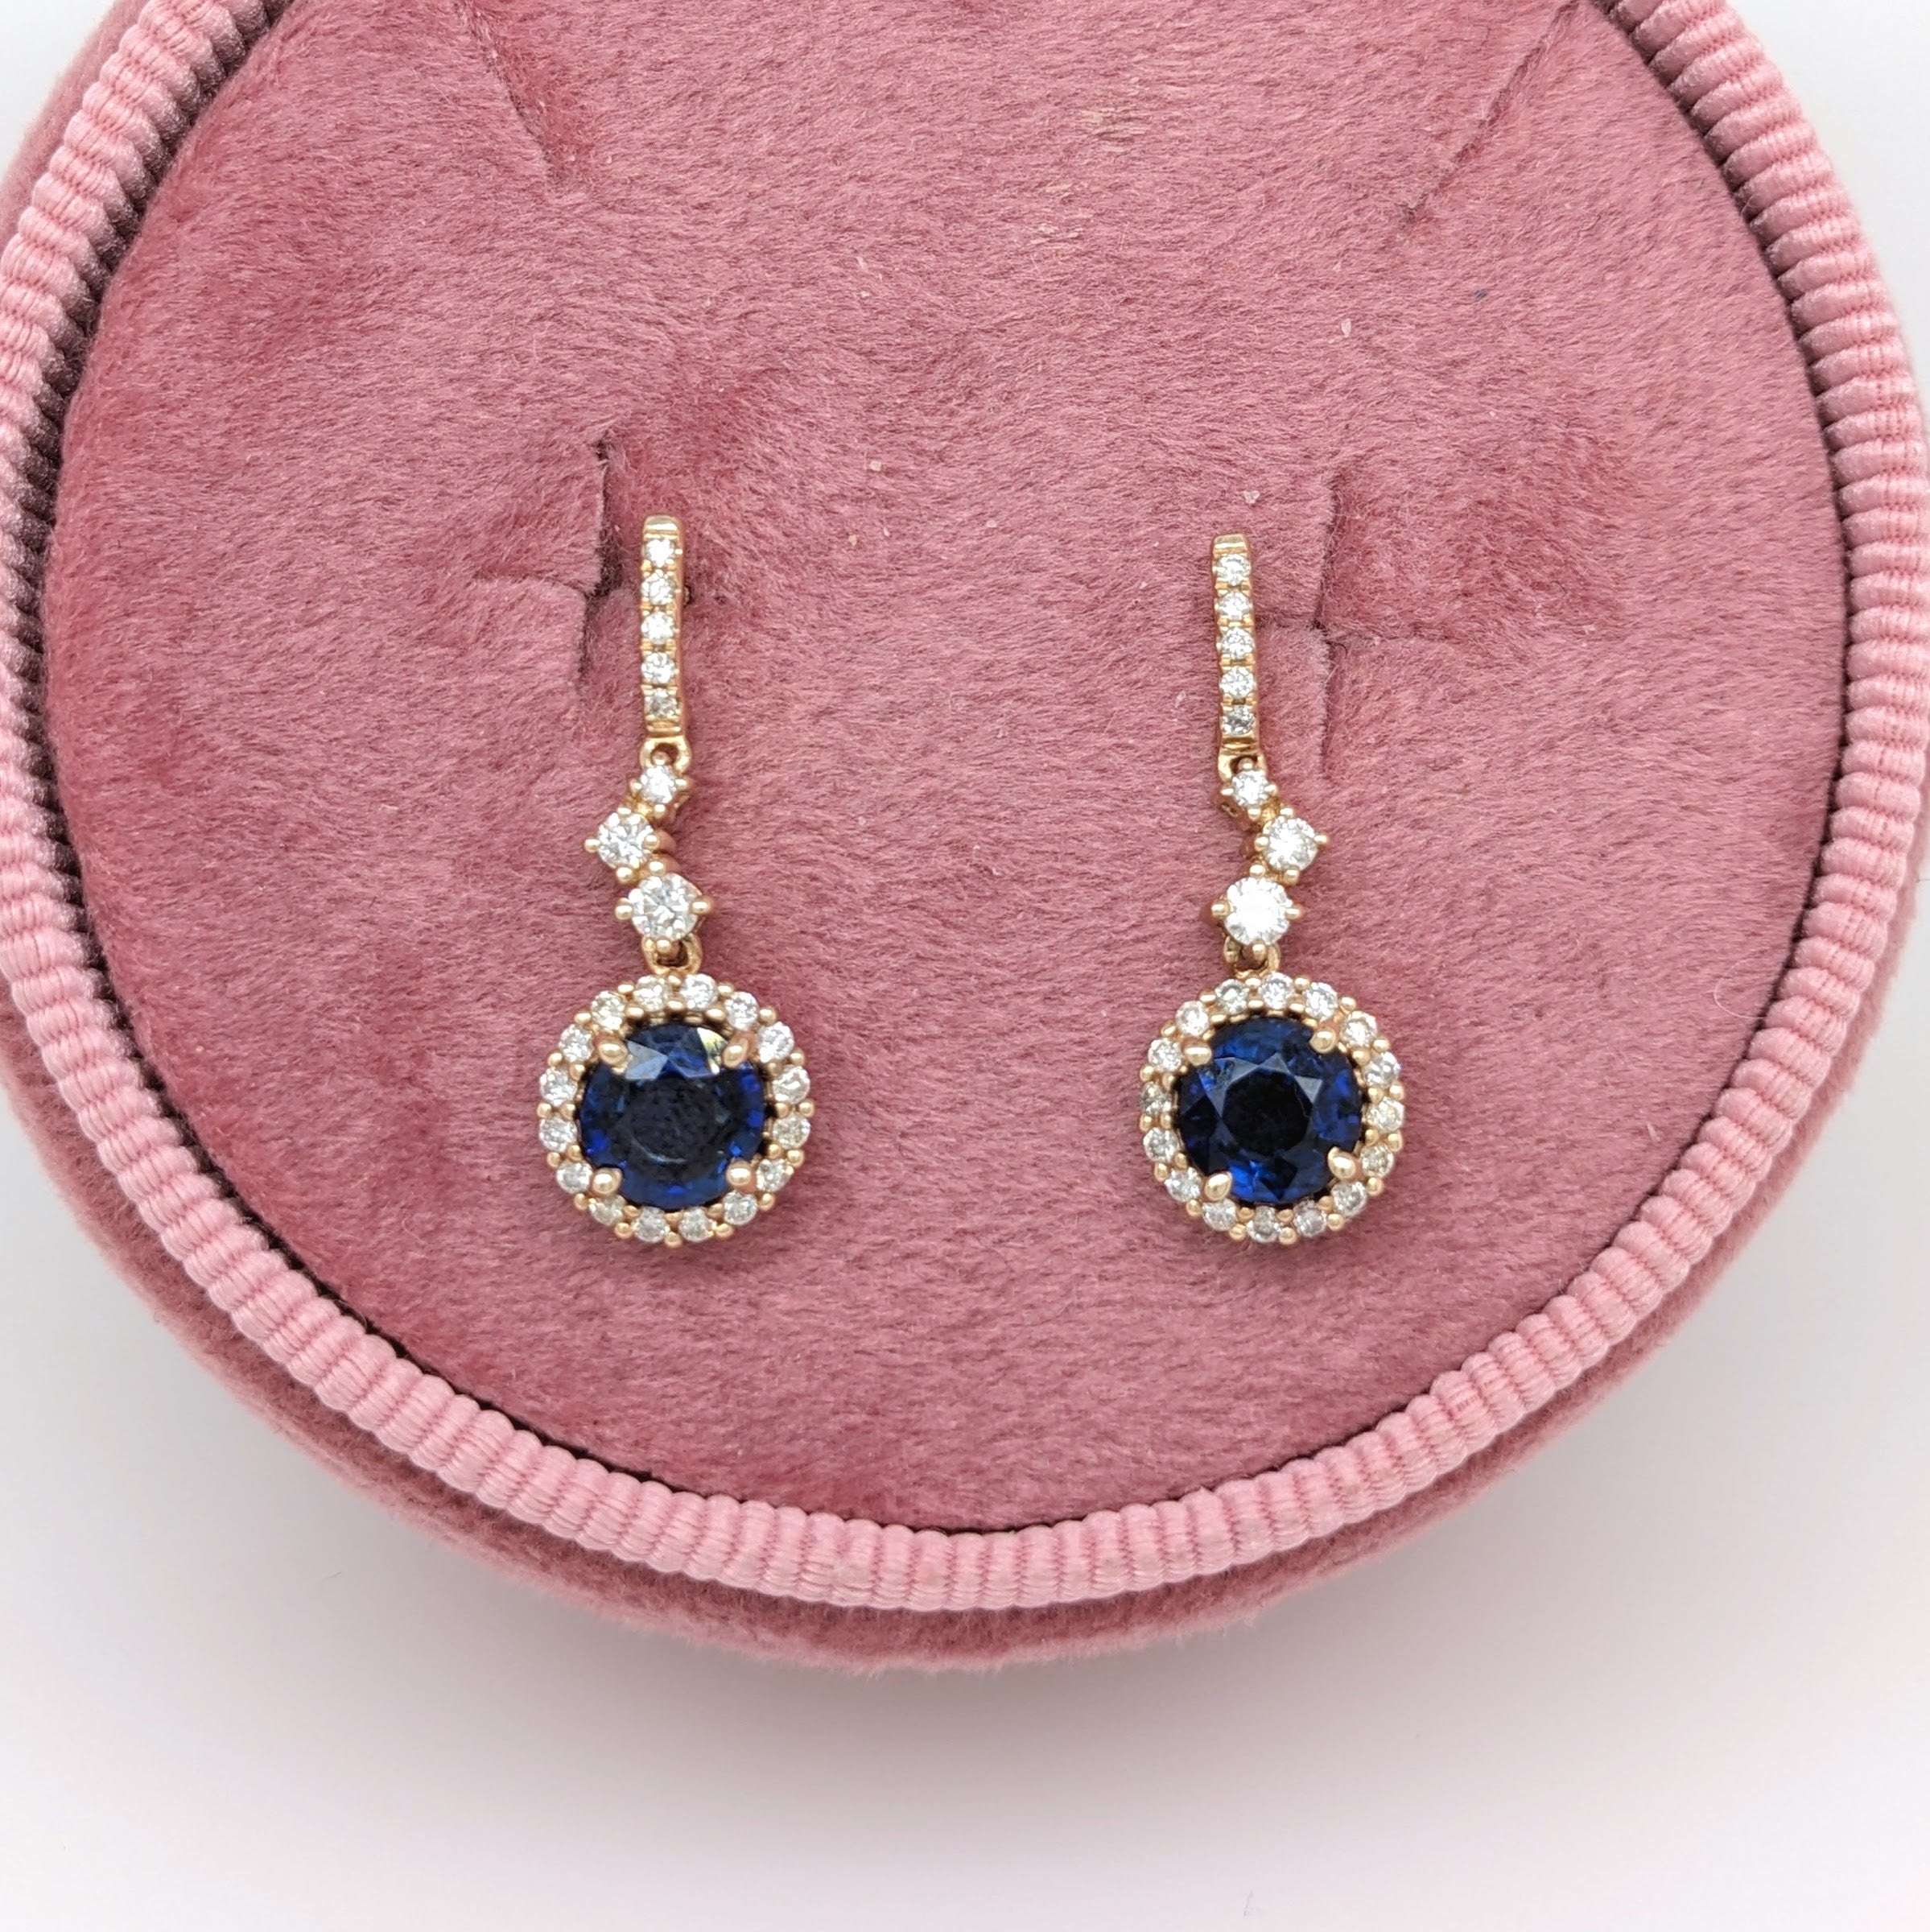 Specifications:

Item Type: Earring
Type: Sapphire
Treatment: Diffused
Size: 6mm
Weight: 2/1.77cts
Shape: Round
Hardness: 9
Metal: 14k/3.07 grams
Diamonds S/I GH: 0.47cts
Sku: AJE051/2495

These earrings are made with solid 14k gold and natural